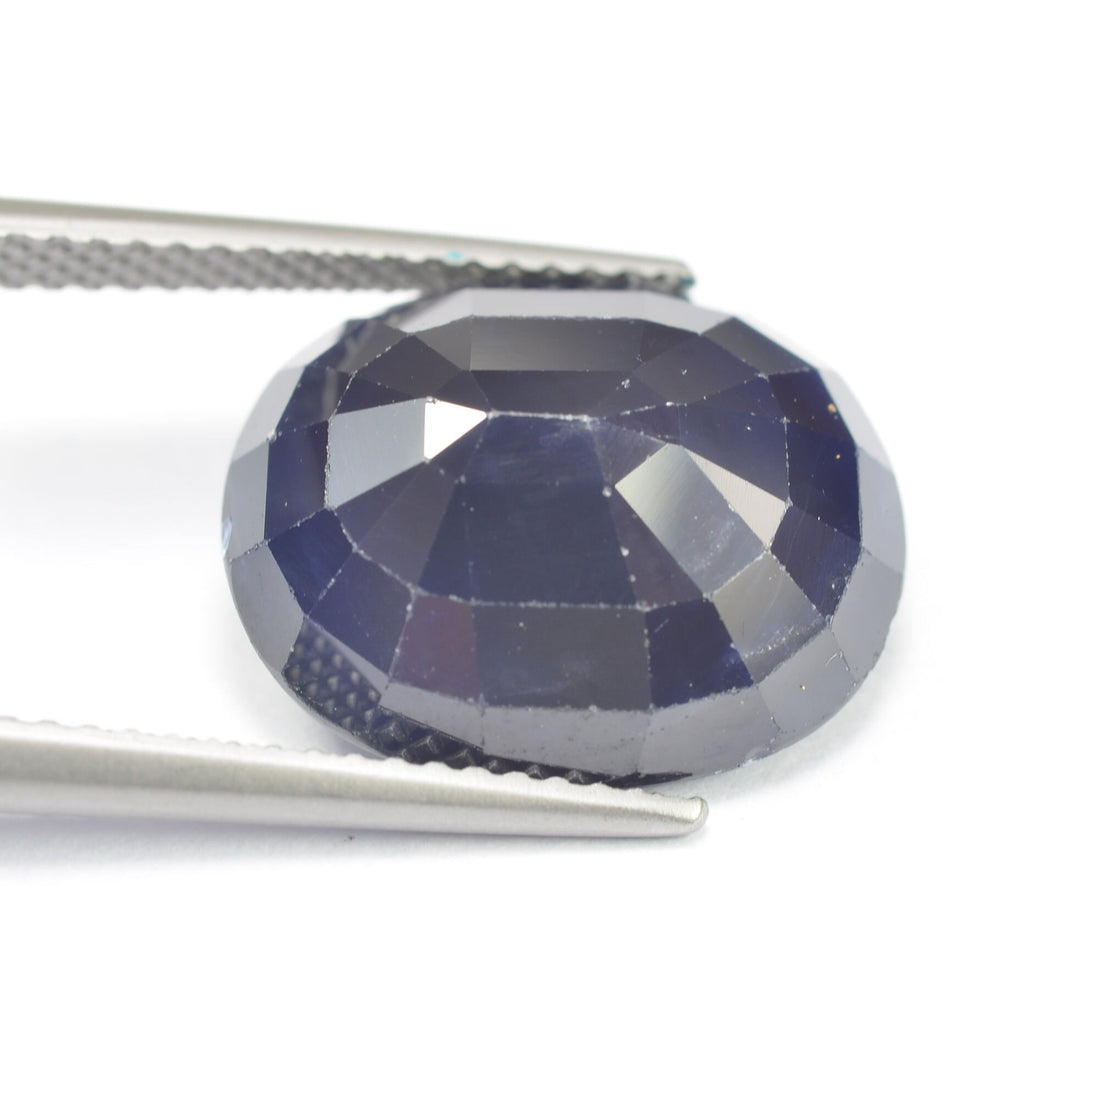 9.43 cts Natural Blue Sapphire Loose Gemstone Oval Cut